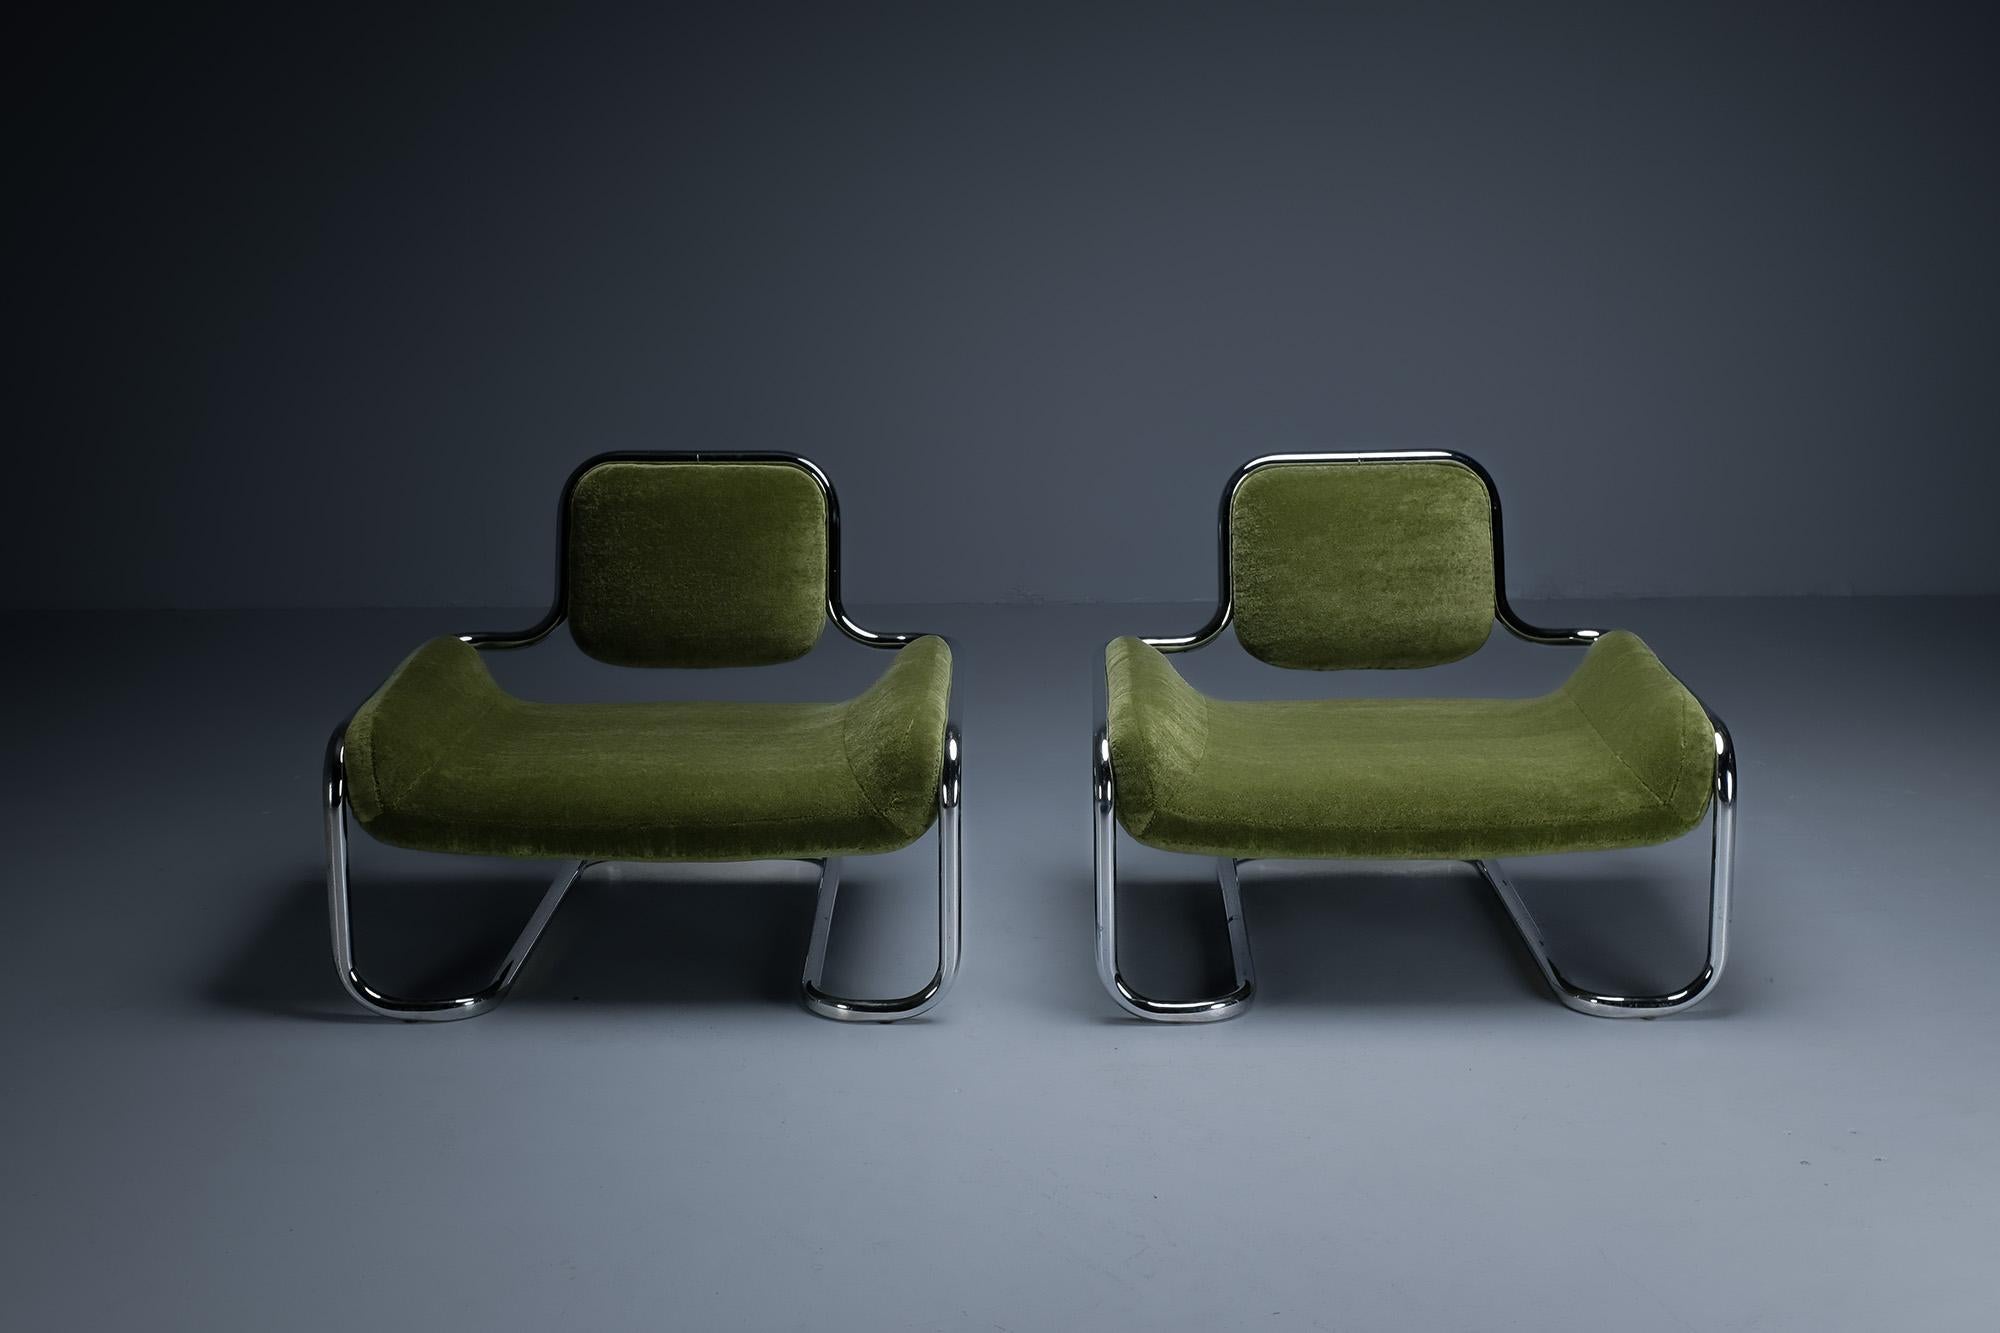 French Green Mohair Lemon Sole Lounge Chairs by Kwok Hoi Chan. Ed. Steiner